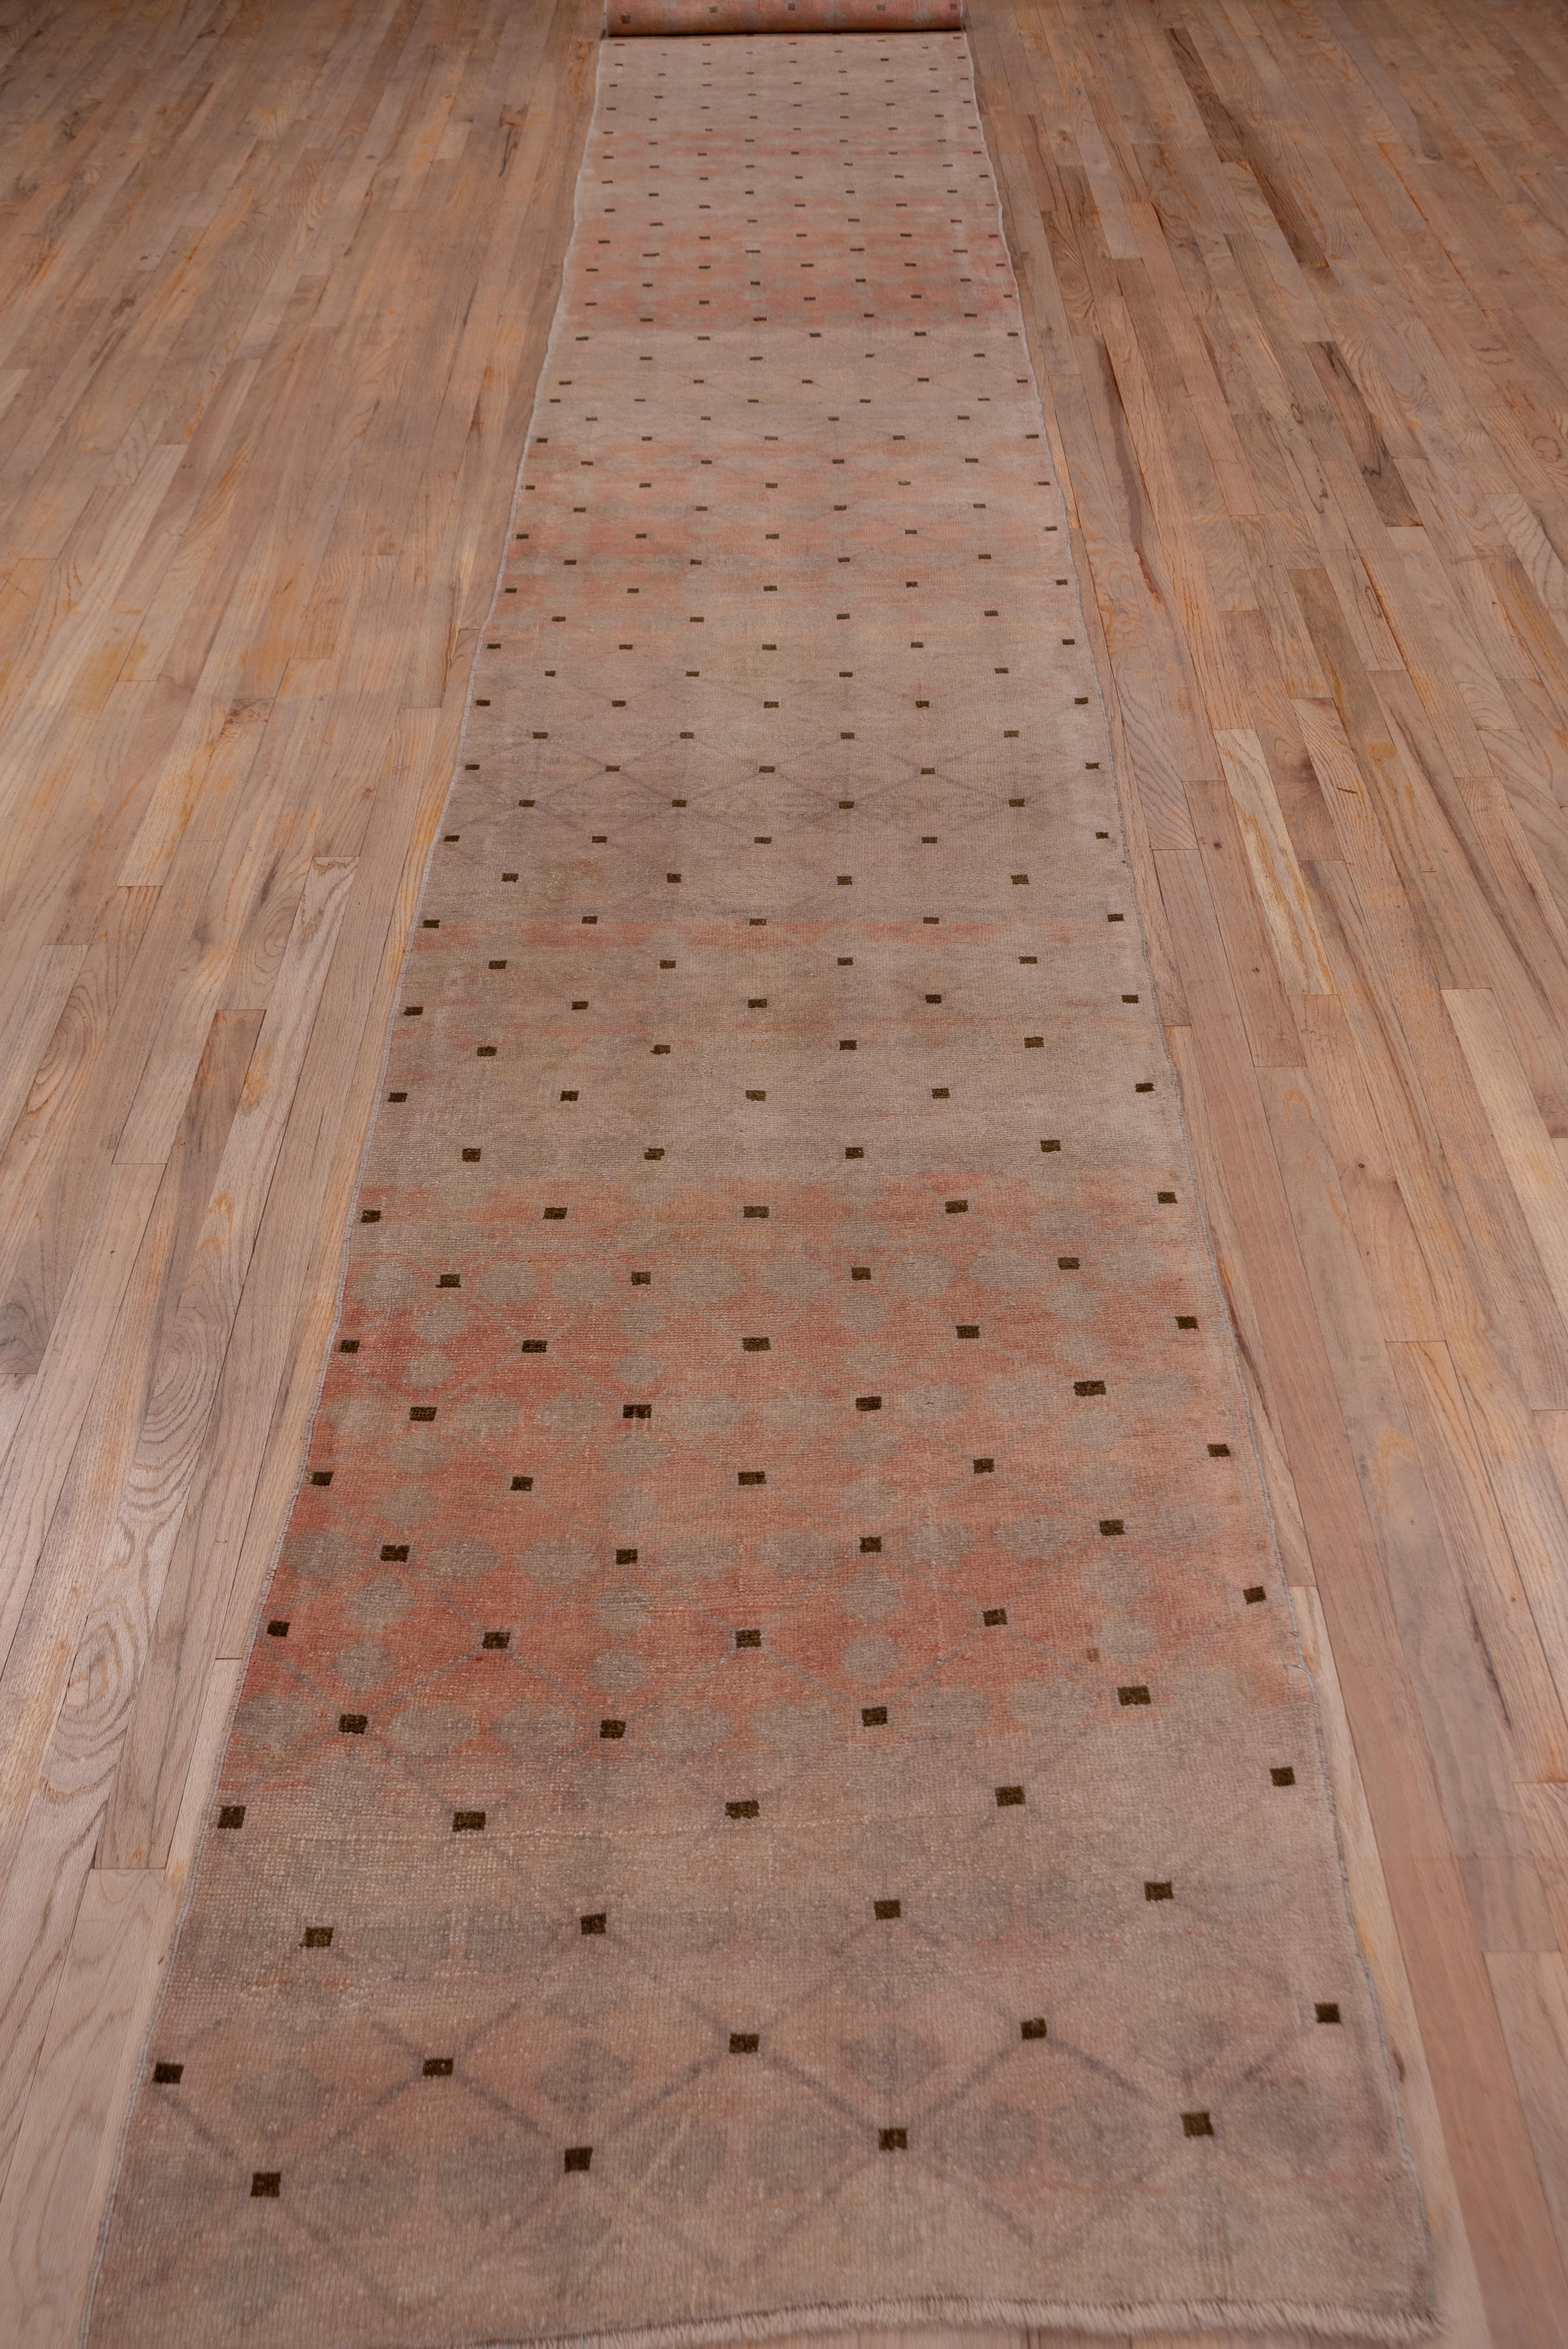 This borderless runner shows an allover diamond lattice with brown squares at the vertices on an oatmeal ground. The condition is good and the lattice is subtle, giving a very modern look to the piece. Also very contemporary.